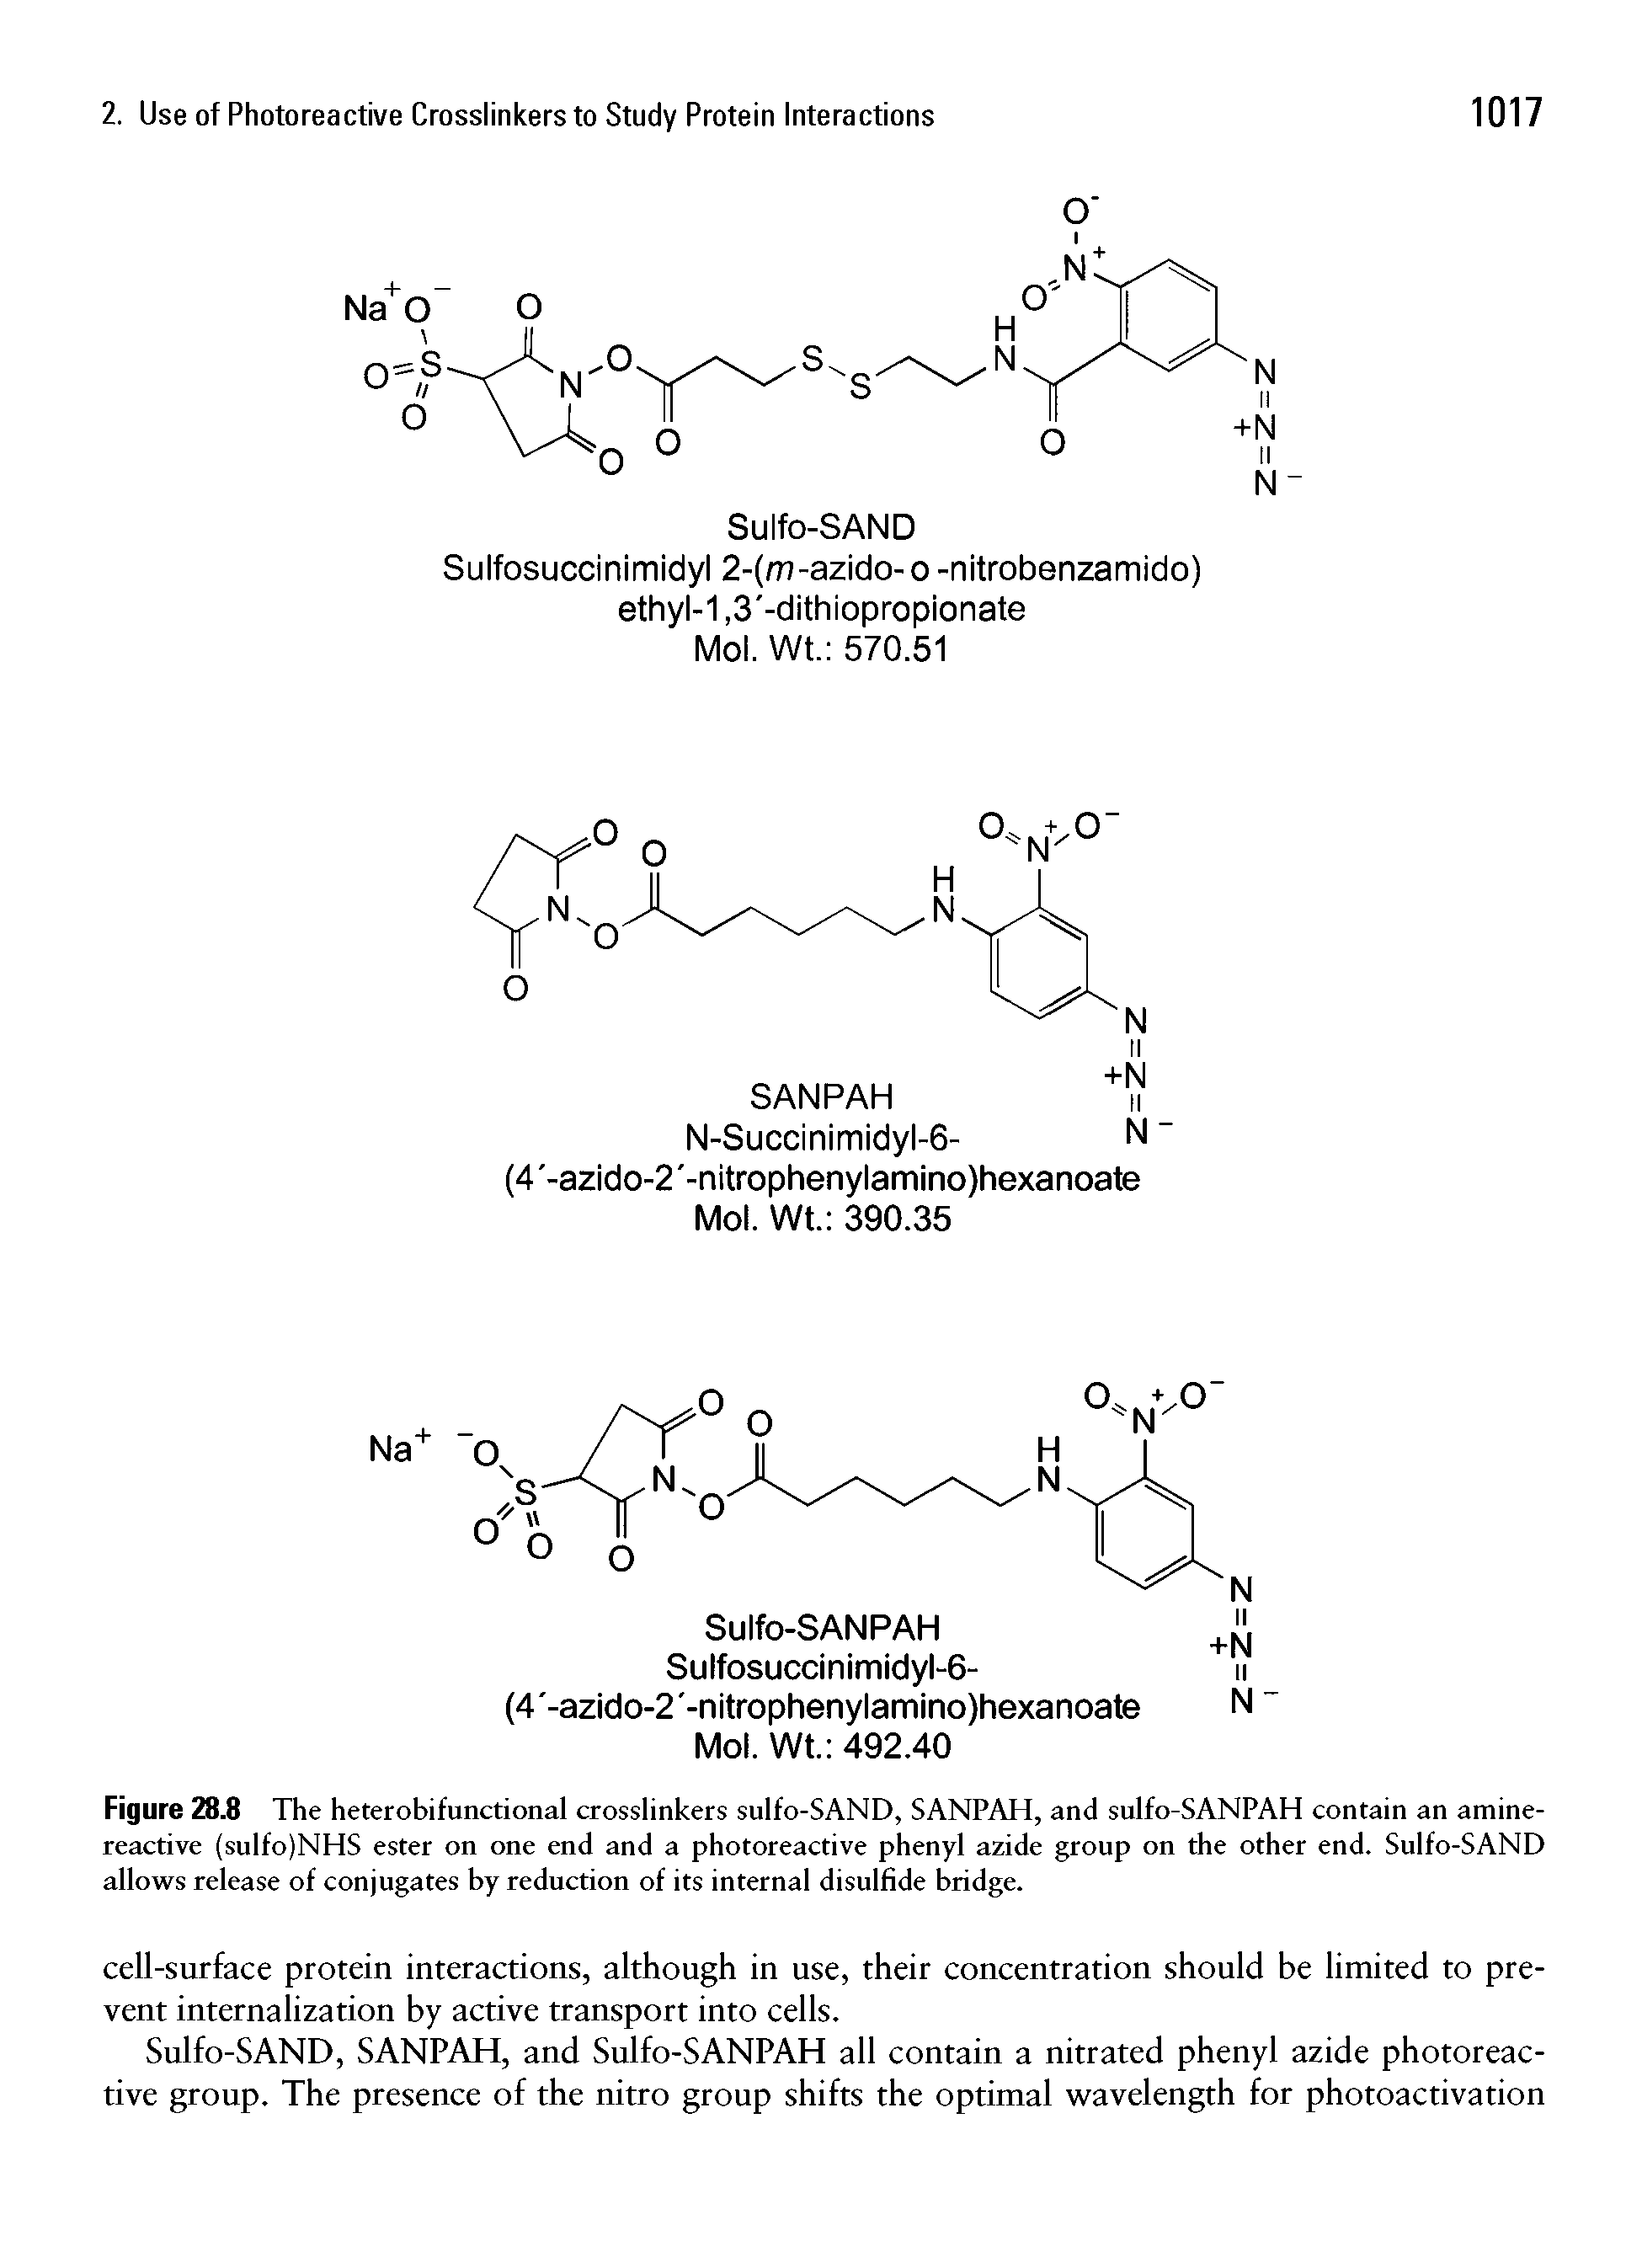 Figure 28.8 The heterobifunctional crosslinkers sulfo-SAND, SANPAH, and sulfo-SANPAH contain an amine-reactive (sulfo)NHS ester on one end and a photoreactive phenyl azide group on the other end. Sulfo-SAND allows release of conjugates by reduction of its internal disulfide bridge.